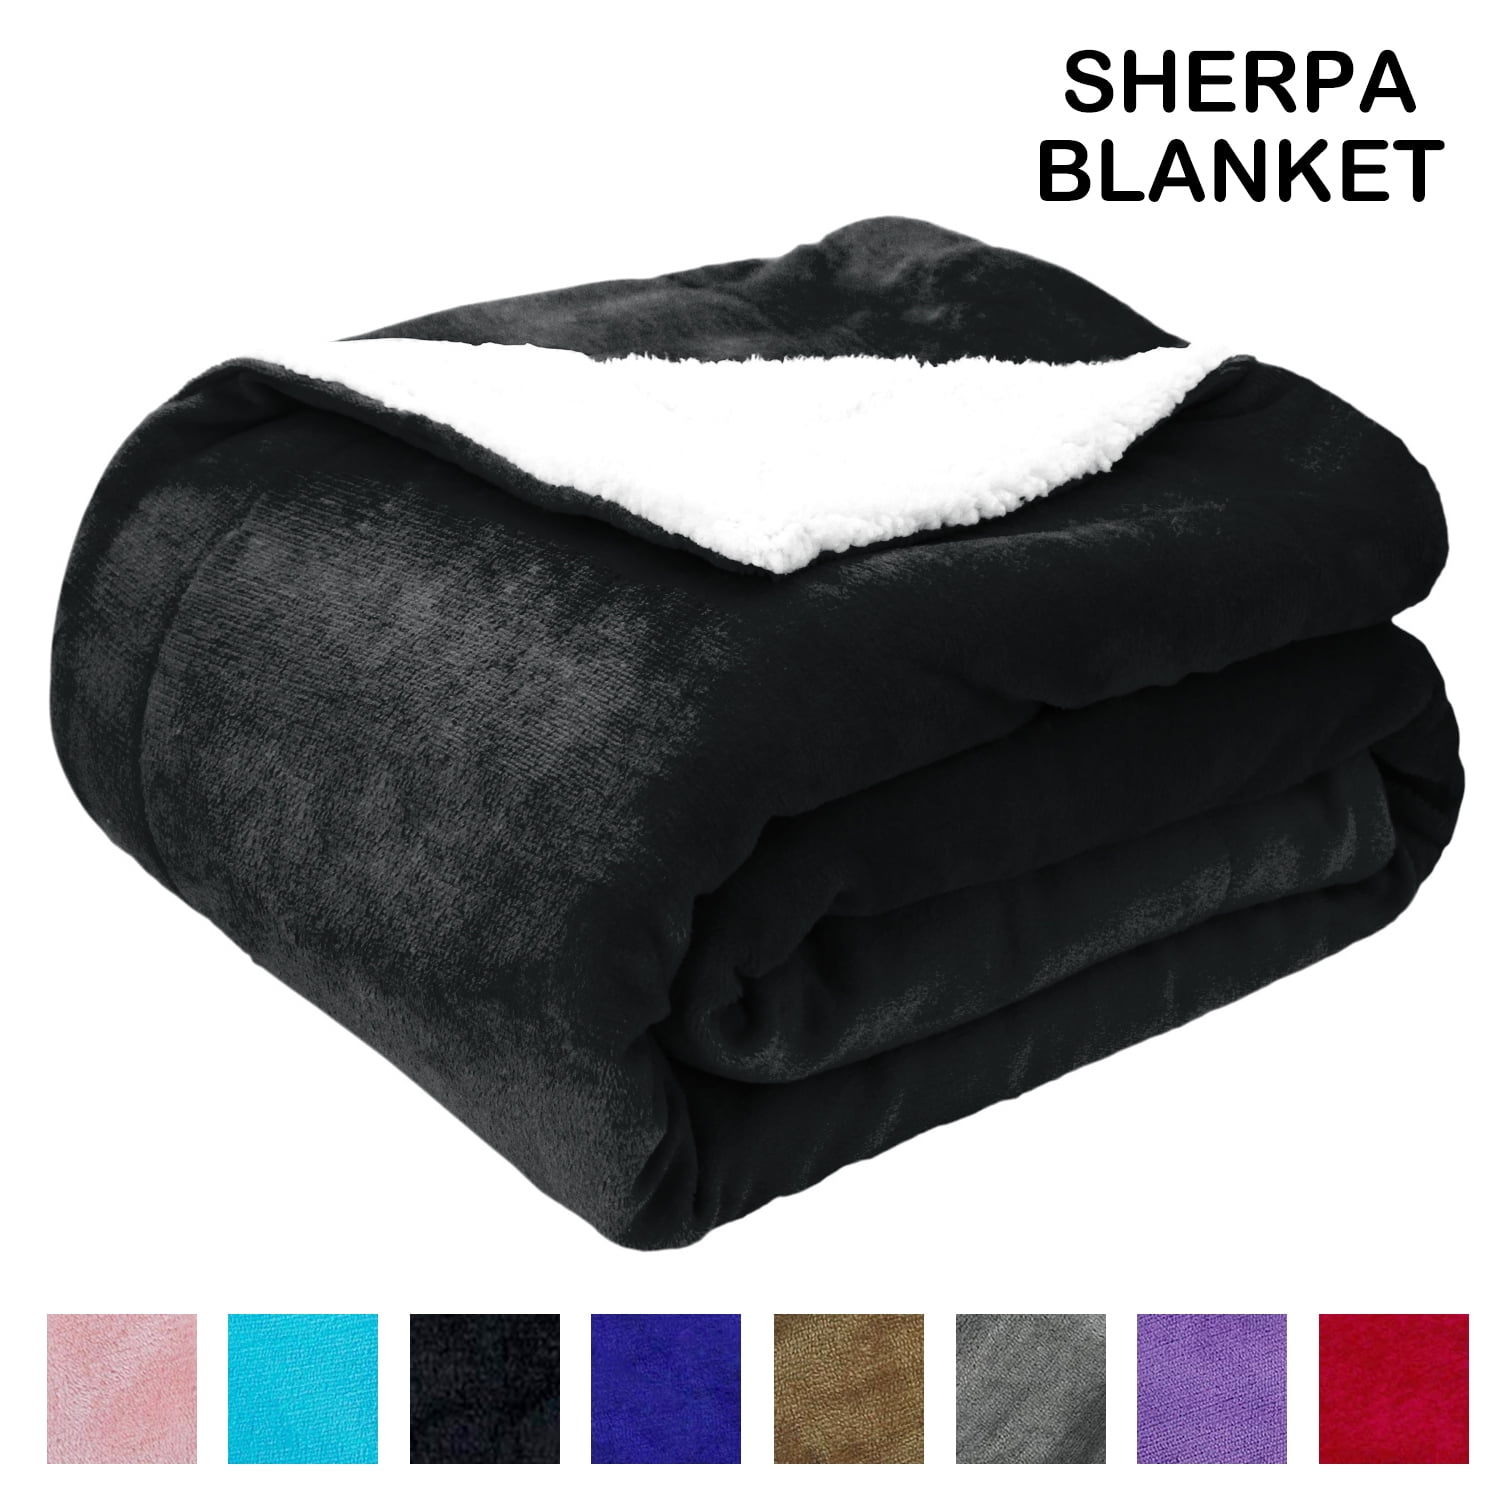 Sherpa Fleece Throw Blanket, King Size Soft Fuzzy Throw Blankets, Gray Warm  Blanket, Cozy Fluffy Comfy for Sofa, Couch, Bed, Camping, Travel, 90 x  106 